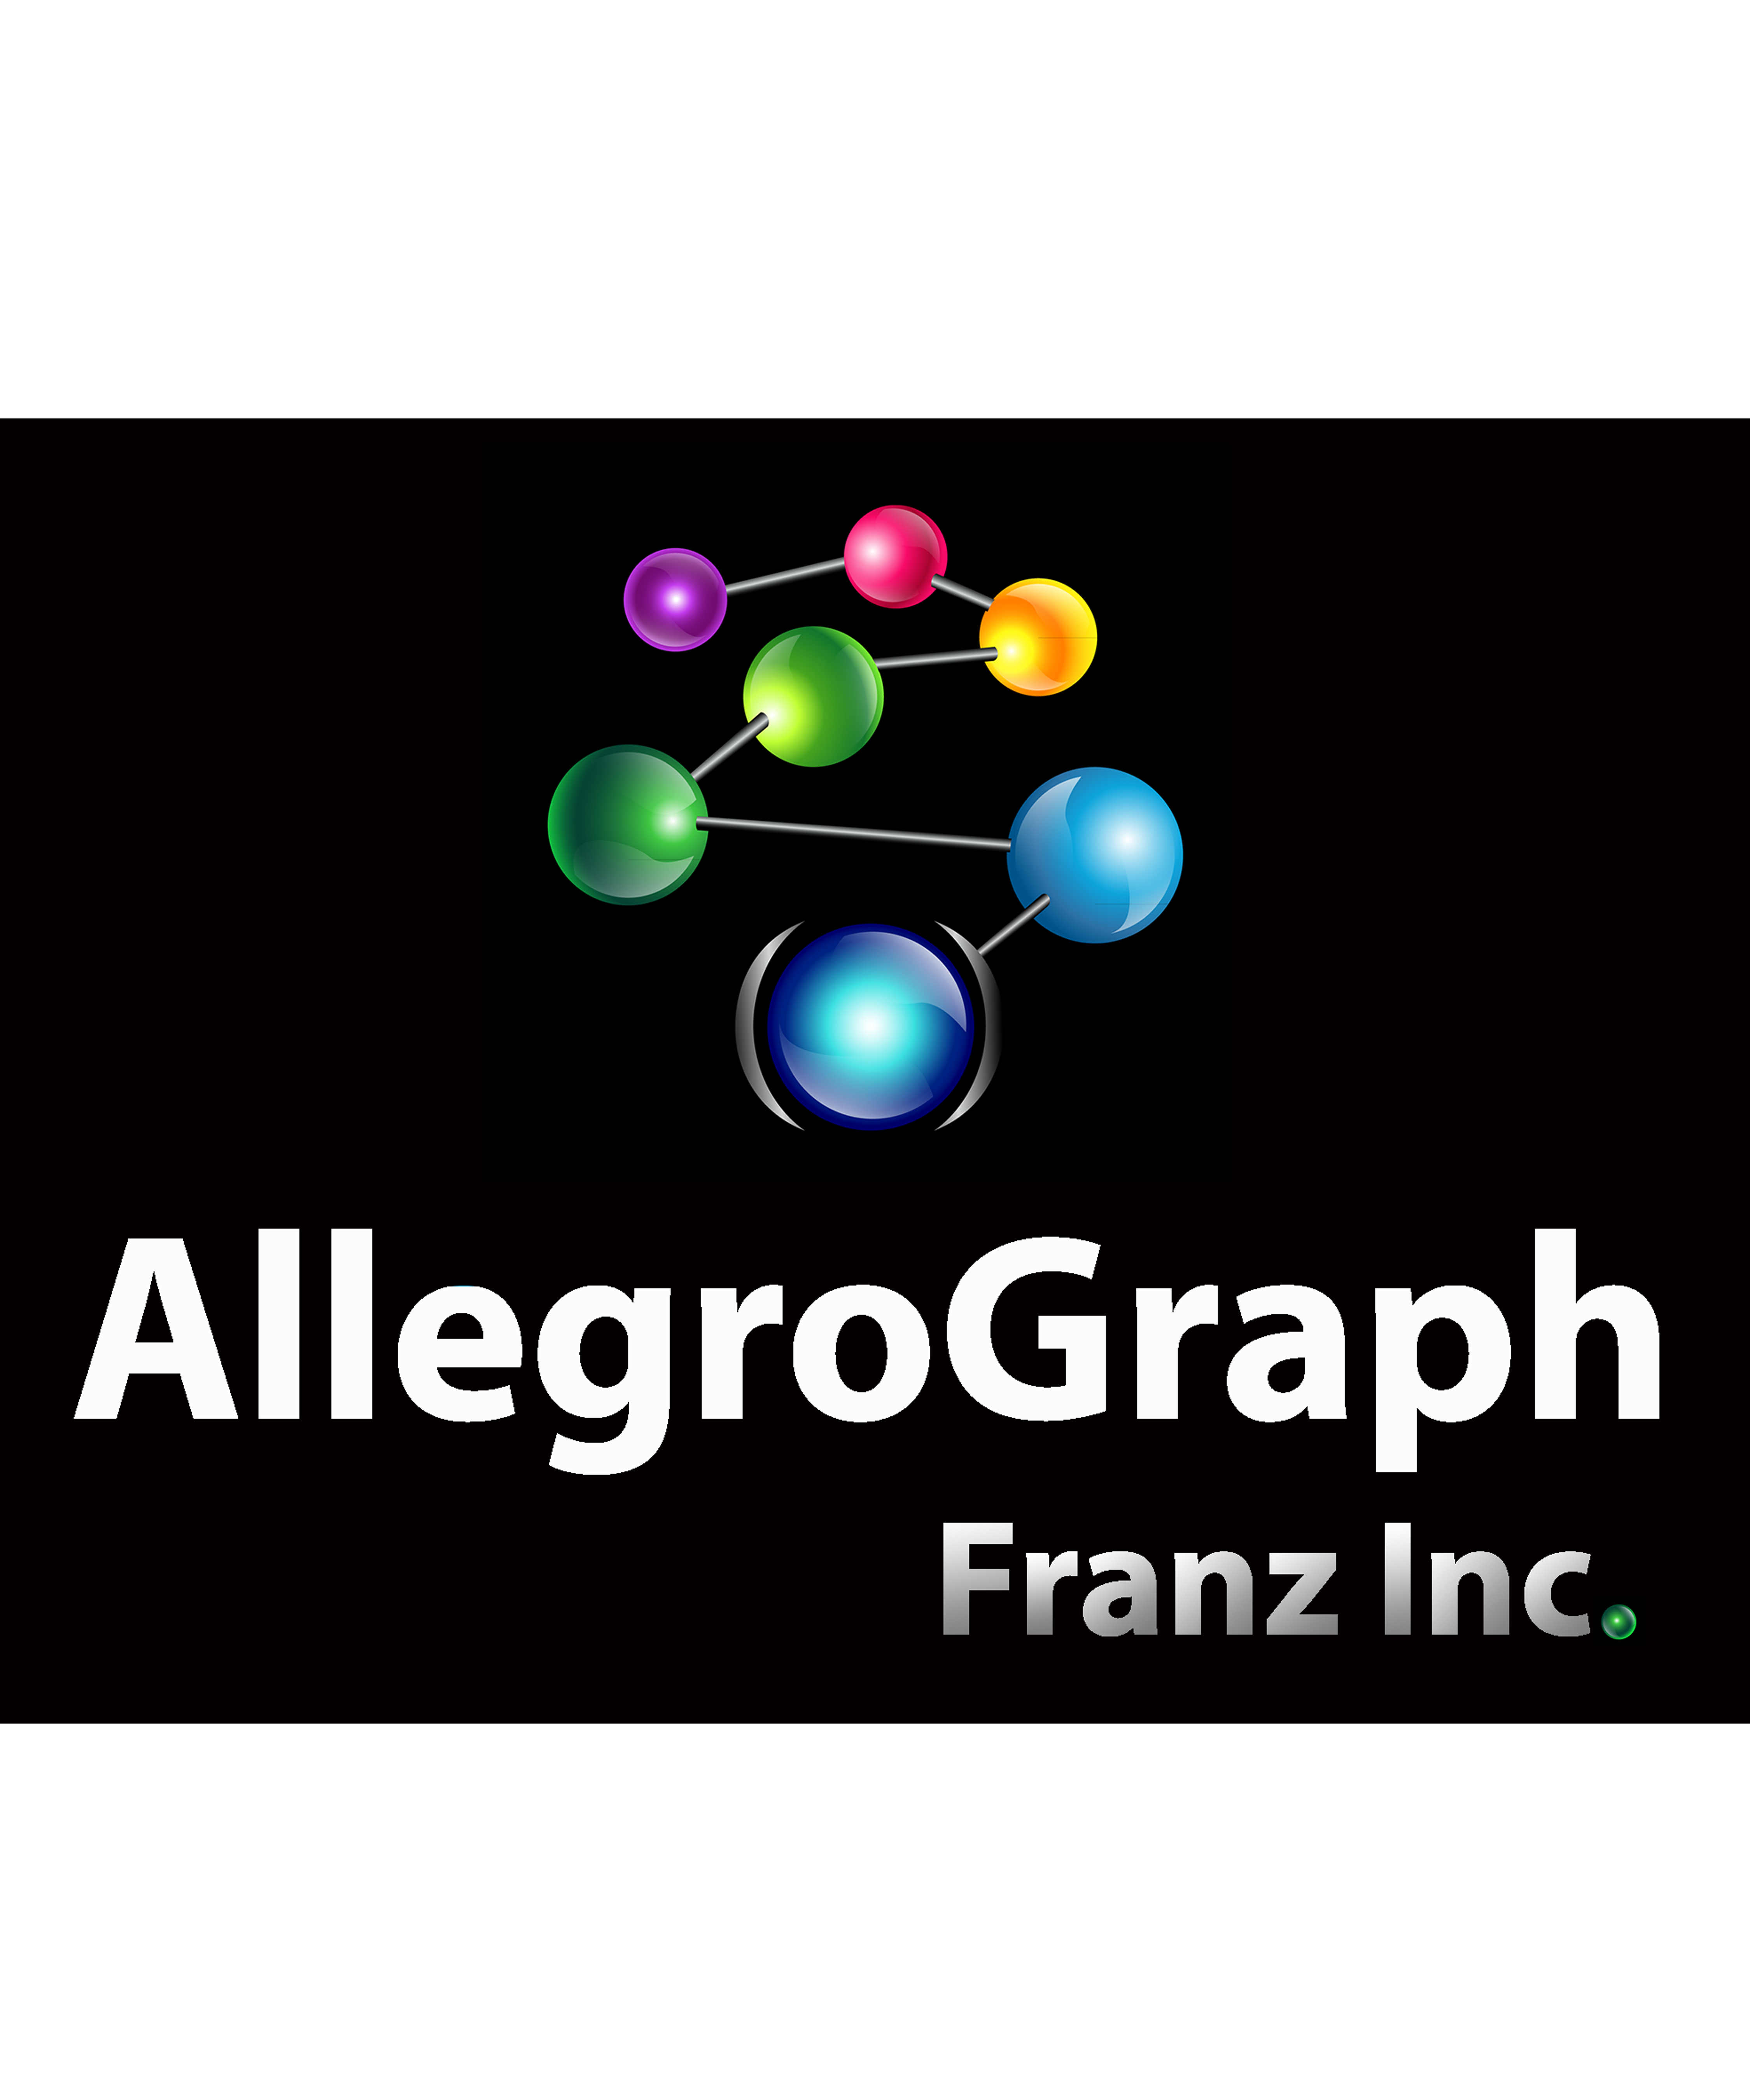 Franz Inc. - AllegroGraph - Knowledge Graph Solutions